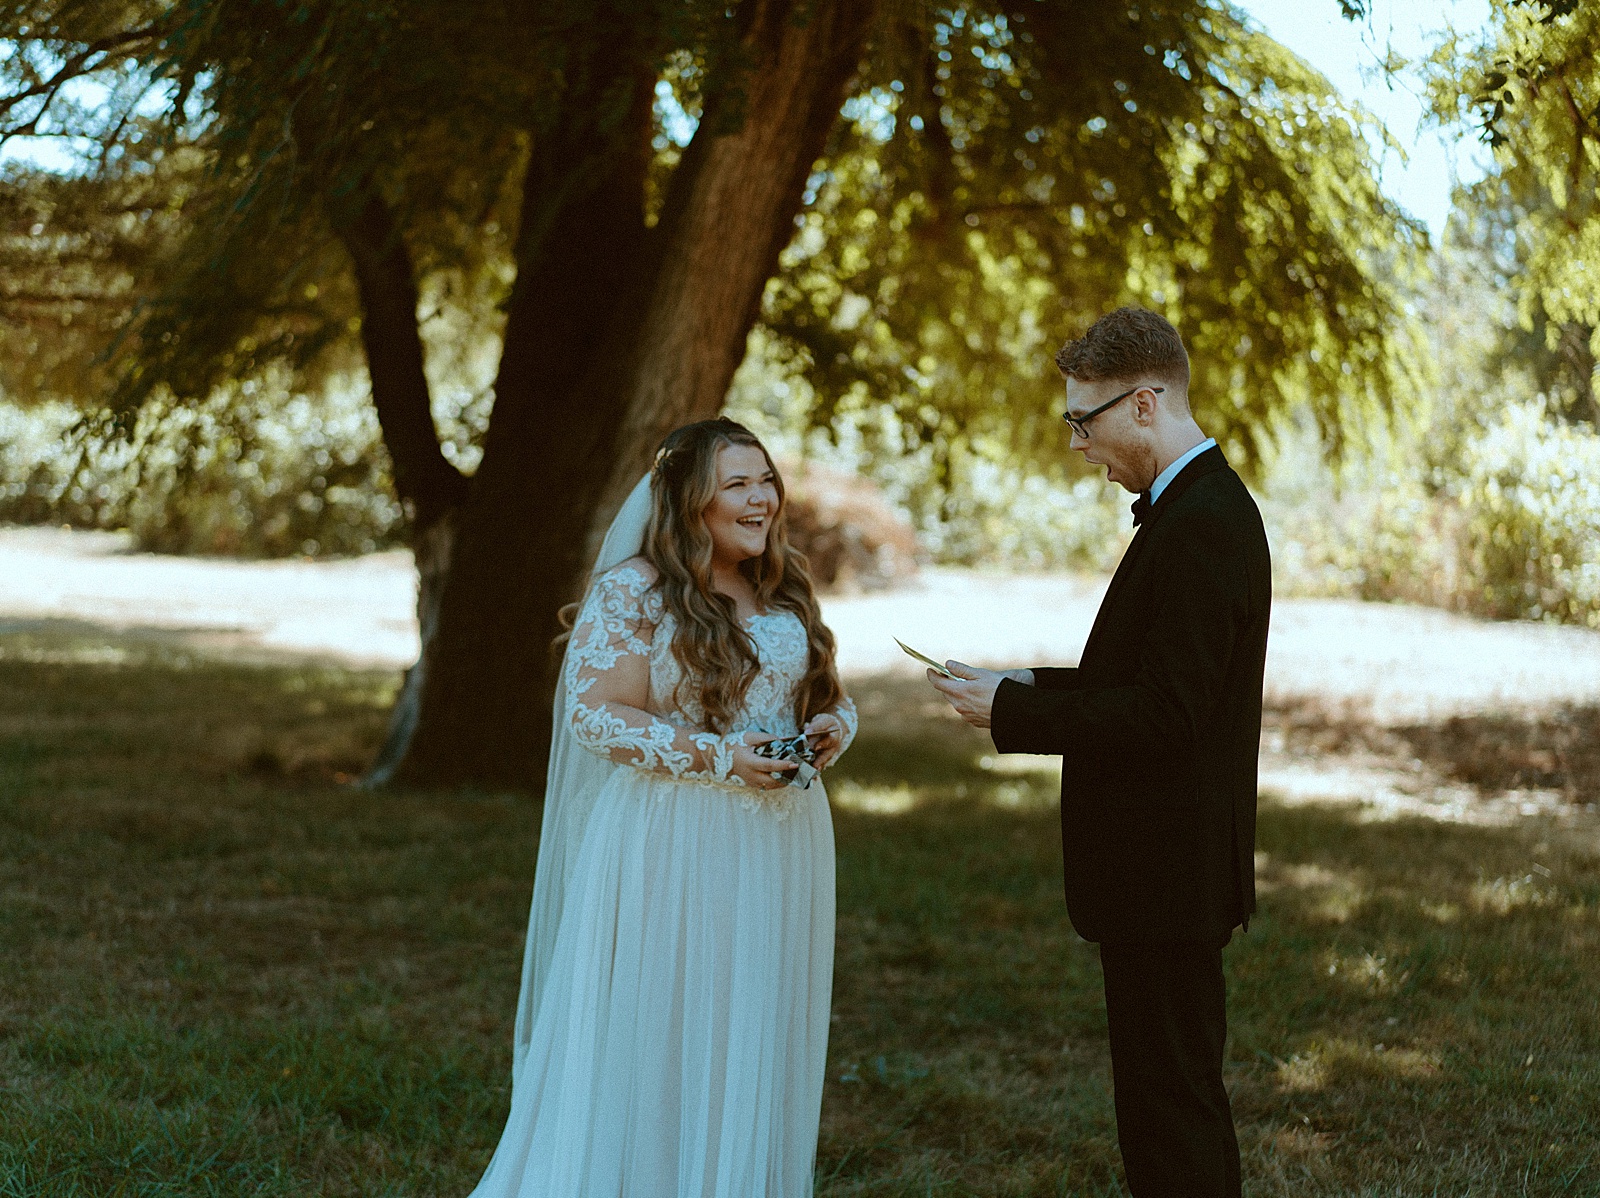 Bride and groom first look under trees exchanging gifts by Danielle Johnson Photography